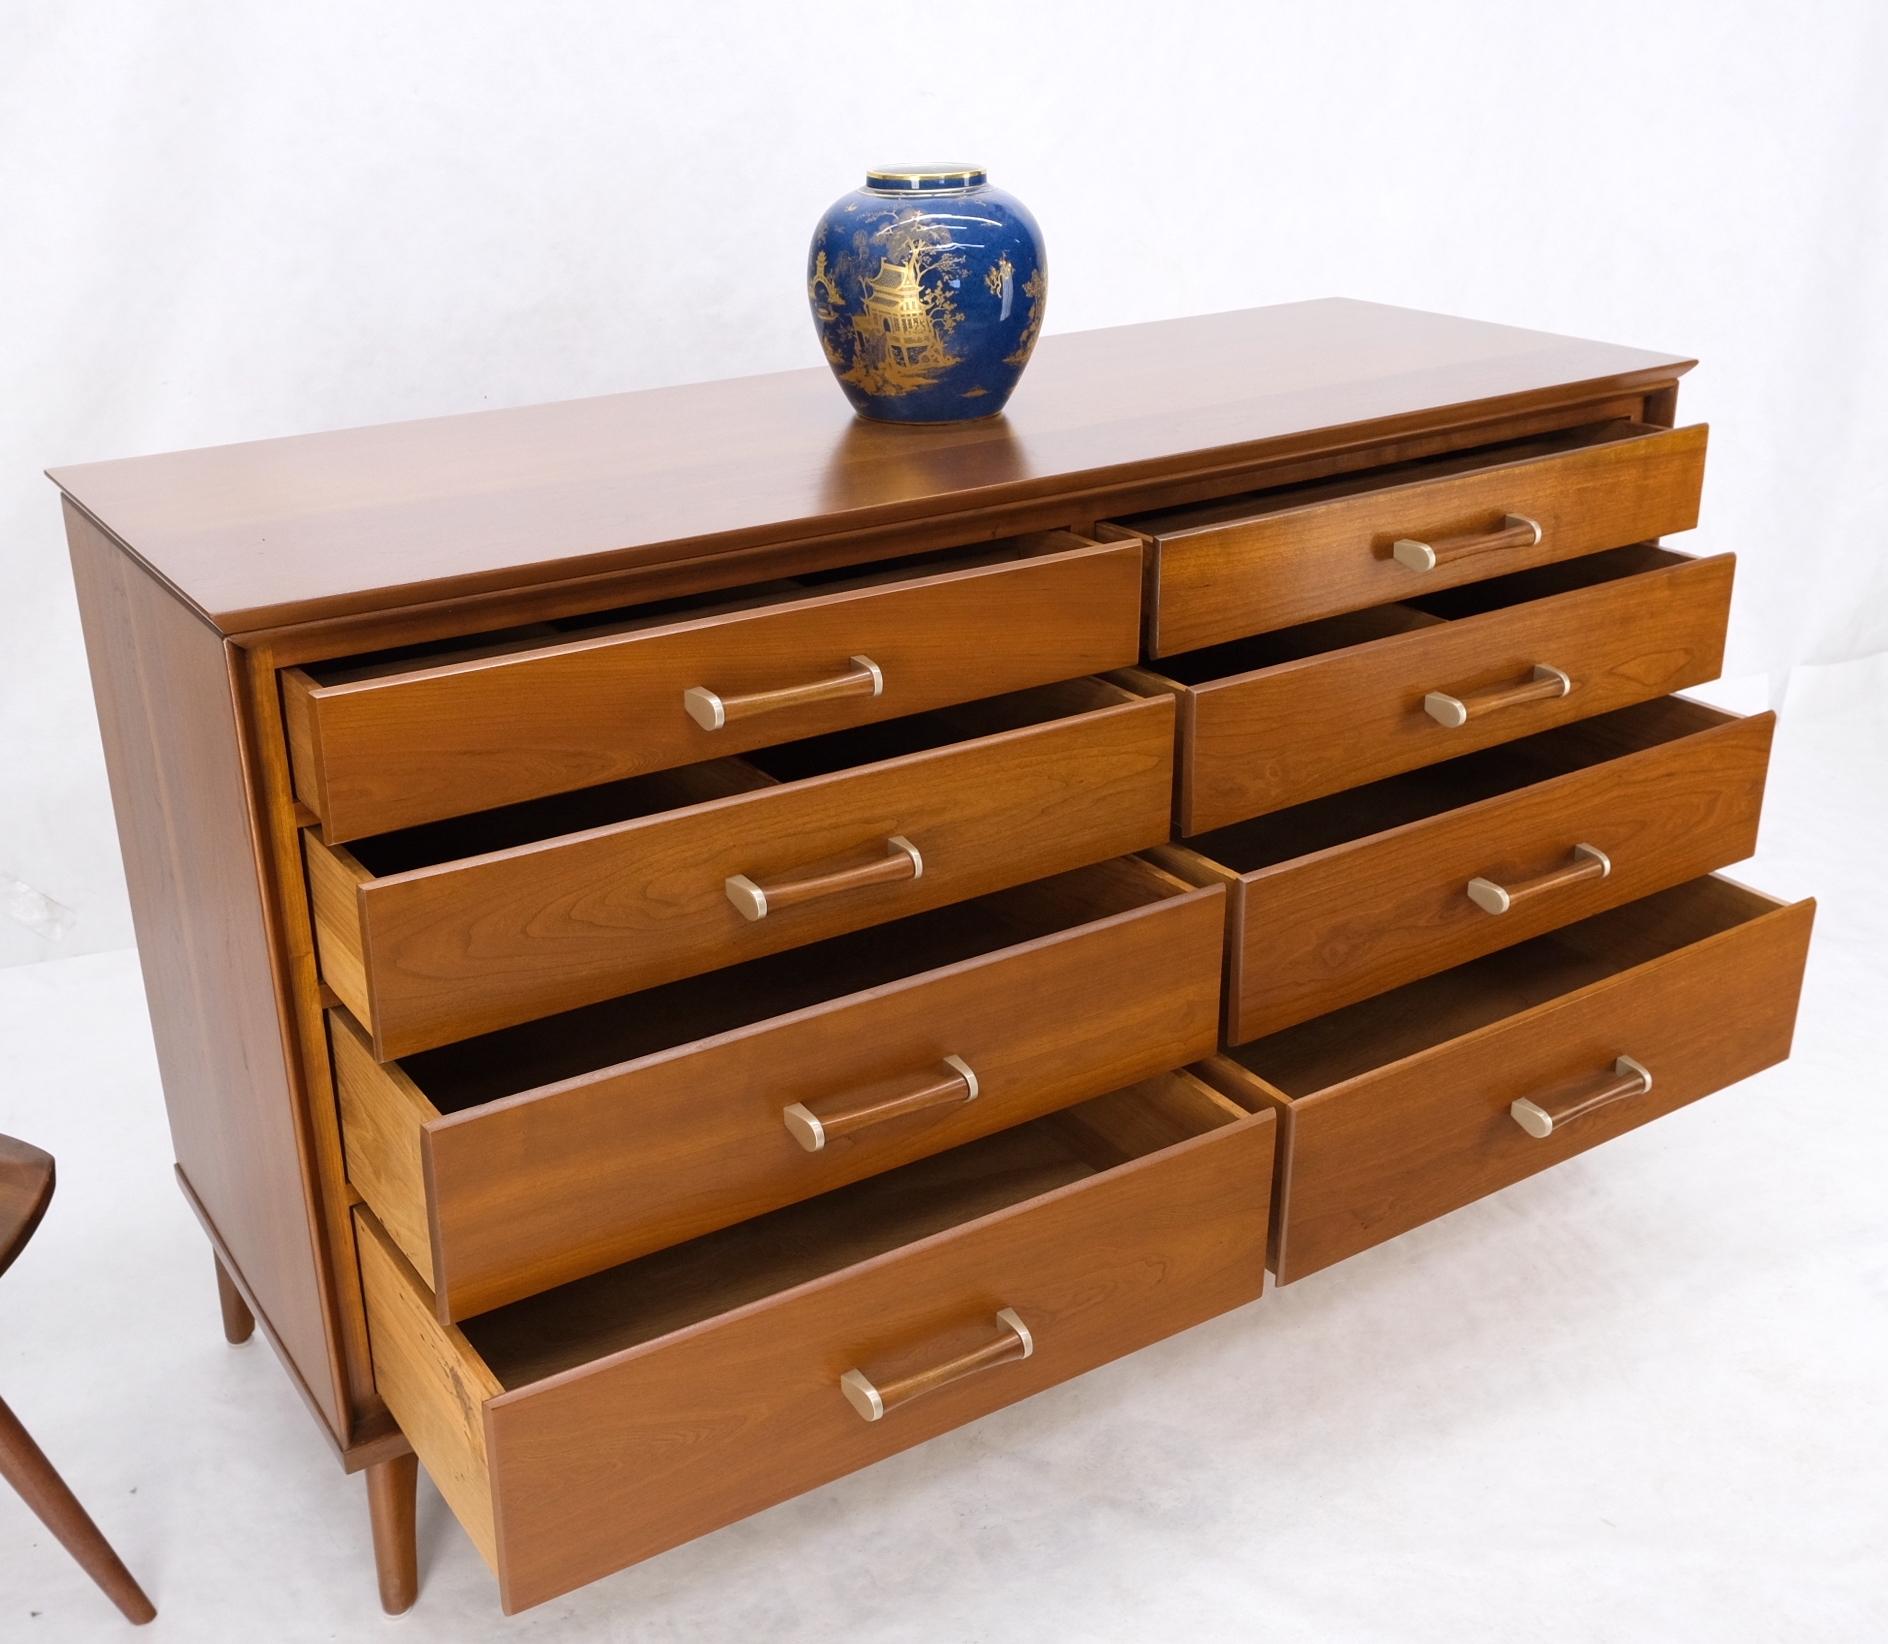 Solid cherry Mid-Century Modern 8 drawers long credenza dresser in style of Renzo Ruttily.